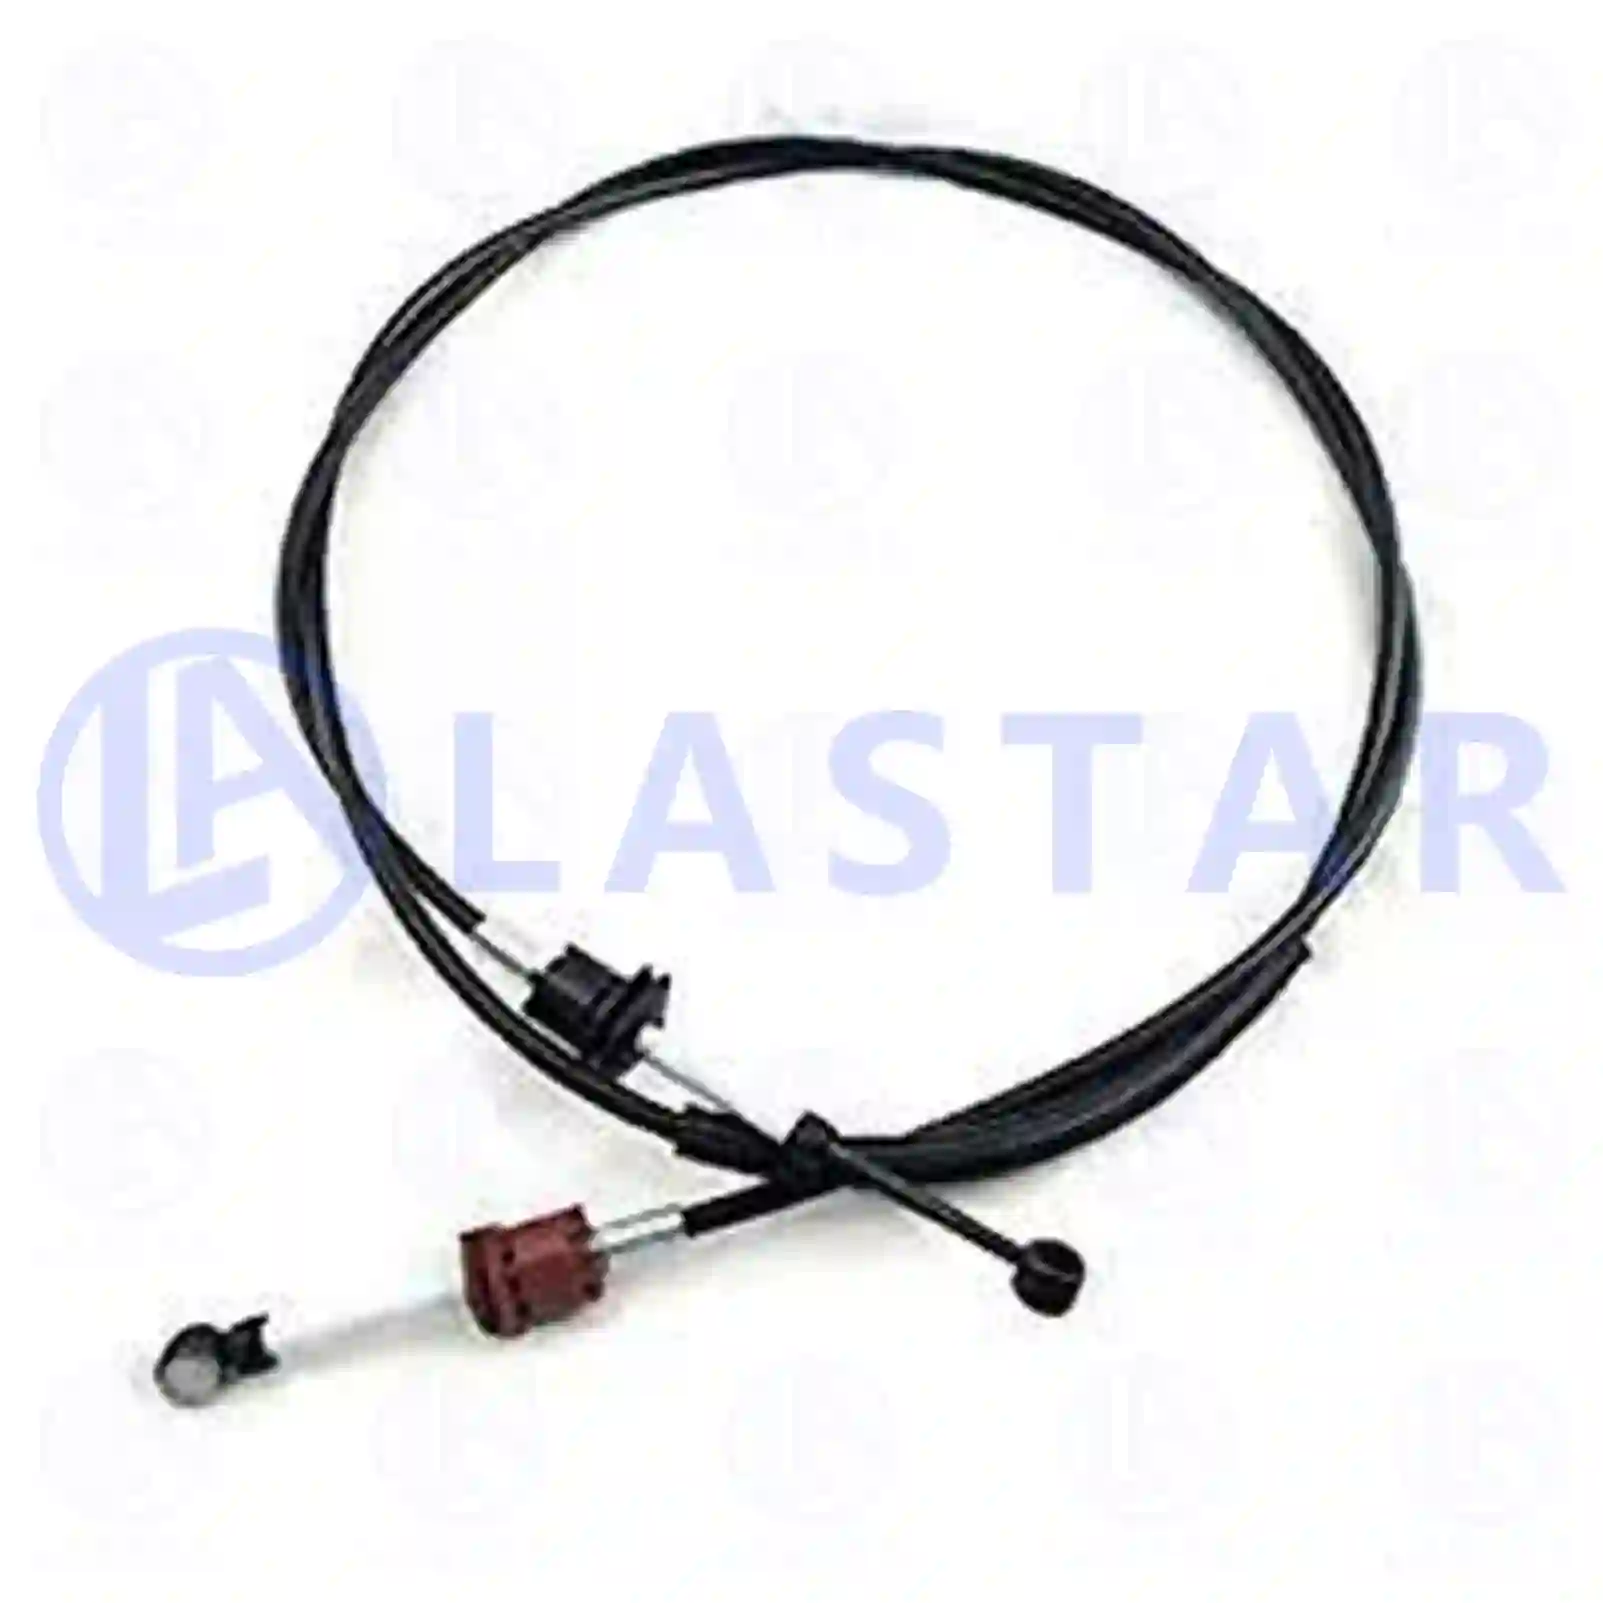 Control cable, switching, 77732690, 20545994, 20700994, 21002894, 21343594, 21789726 ||  77732690 Lastar Spare Part | Truck Spare Parts, Auotomotive Spare Parts Control cable, switching, 77732690, 20545994, 20700994, 21002894, 21343594, 21789726 ||  77732690 Lastar Spare Part | Truck Spare Parts, Auotomotive Spare Parts